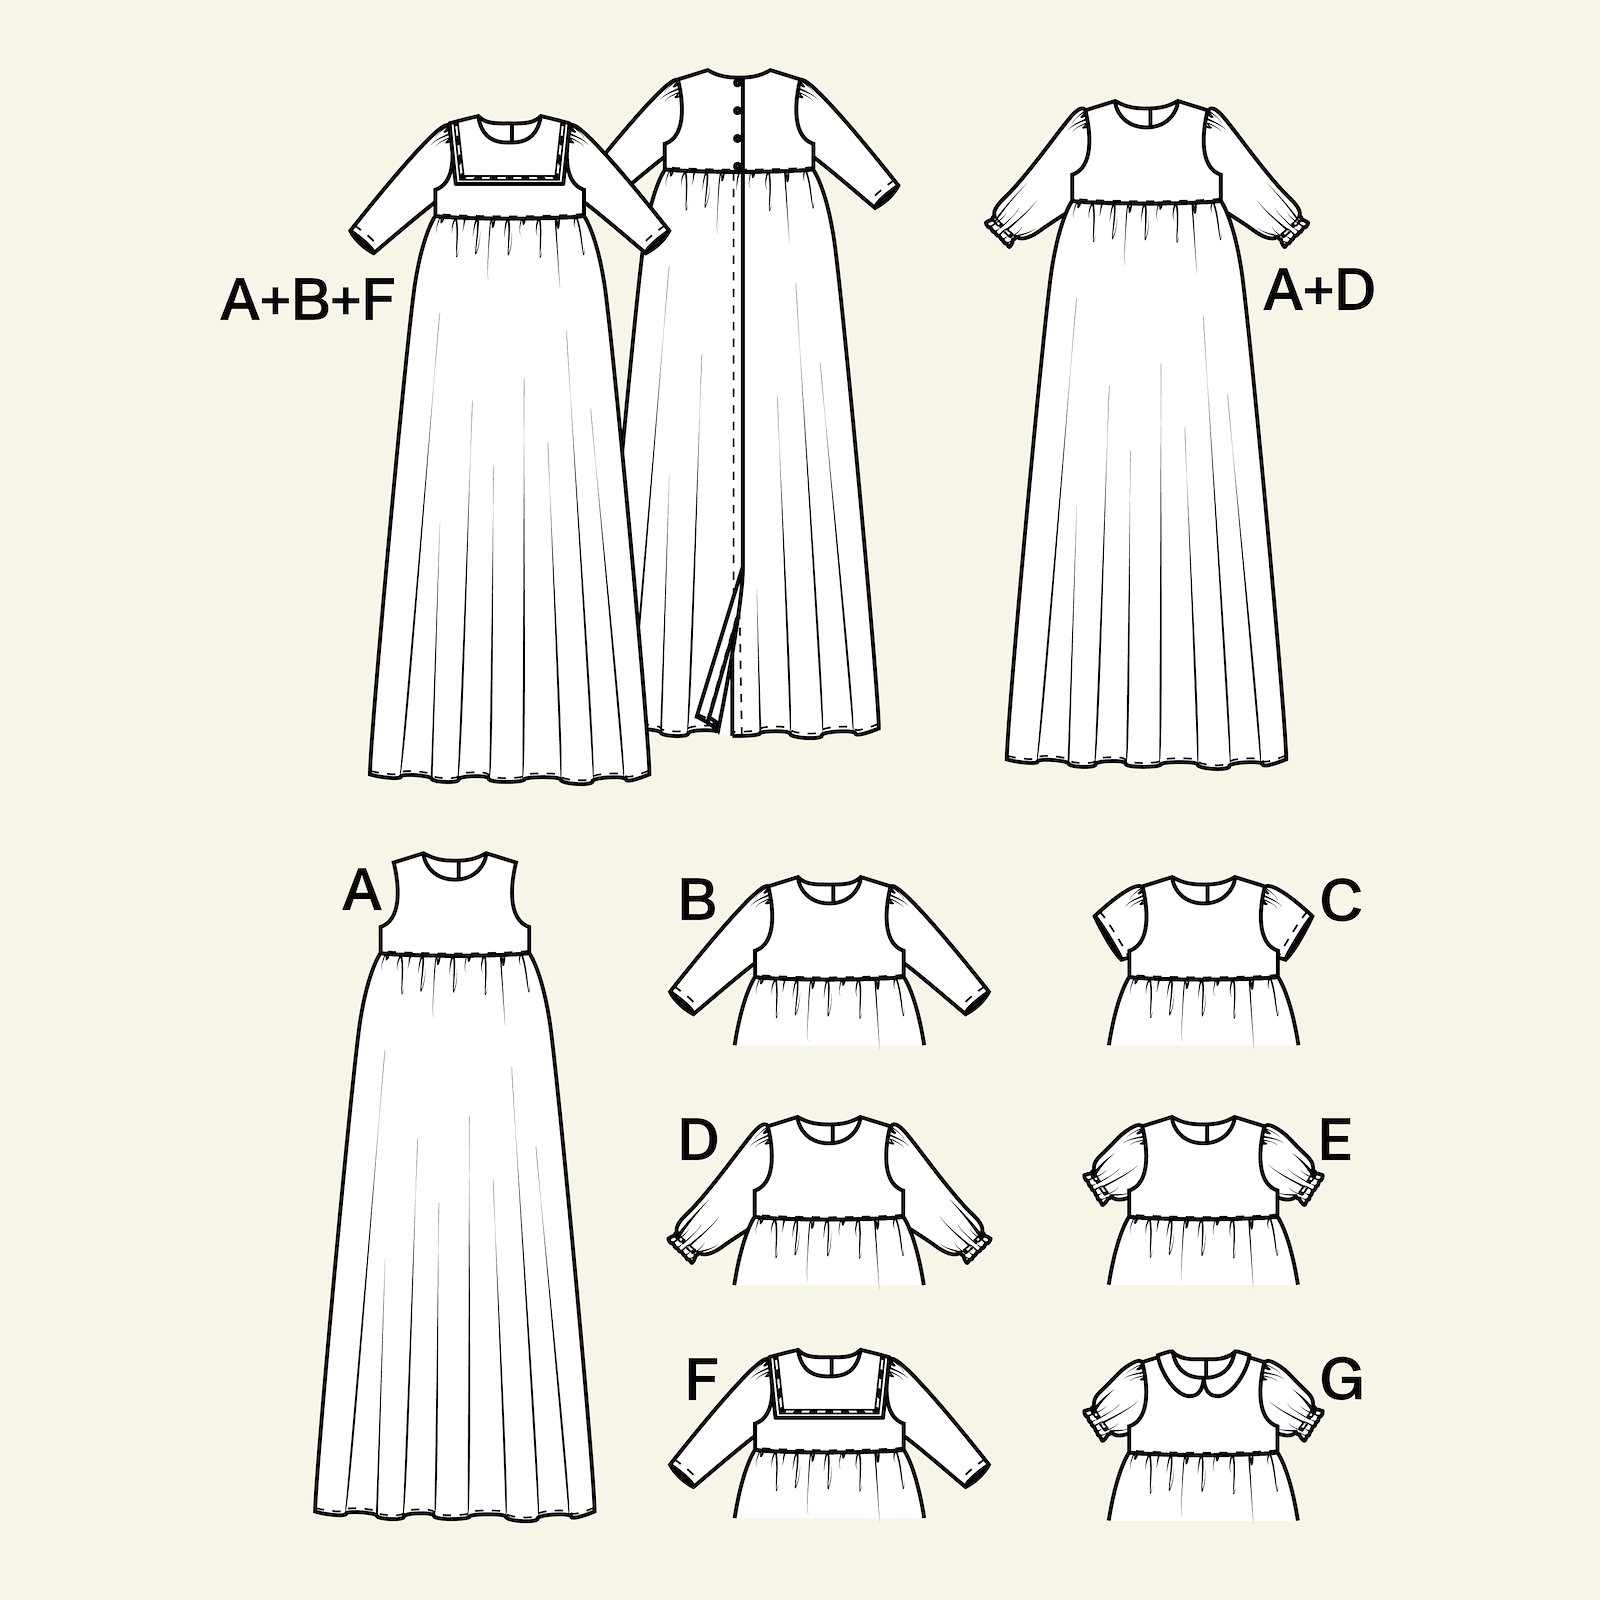 Own designed christening gown 62/68 - 74/80 p83018000_p83018001_p83018002_p83018003_p83018004_pack_b